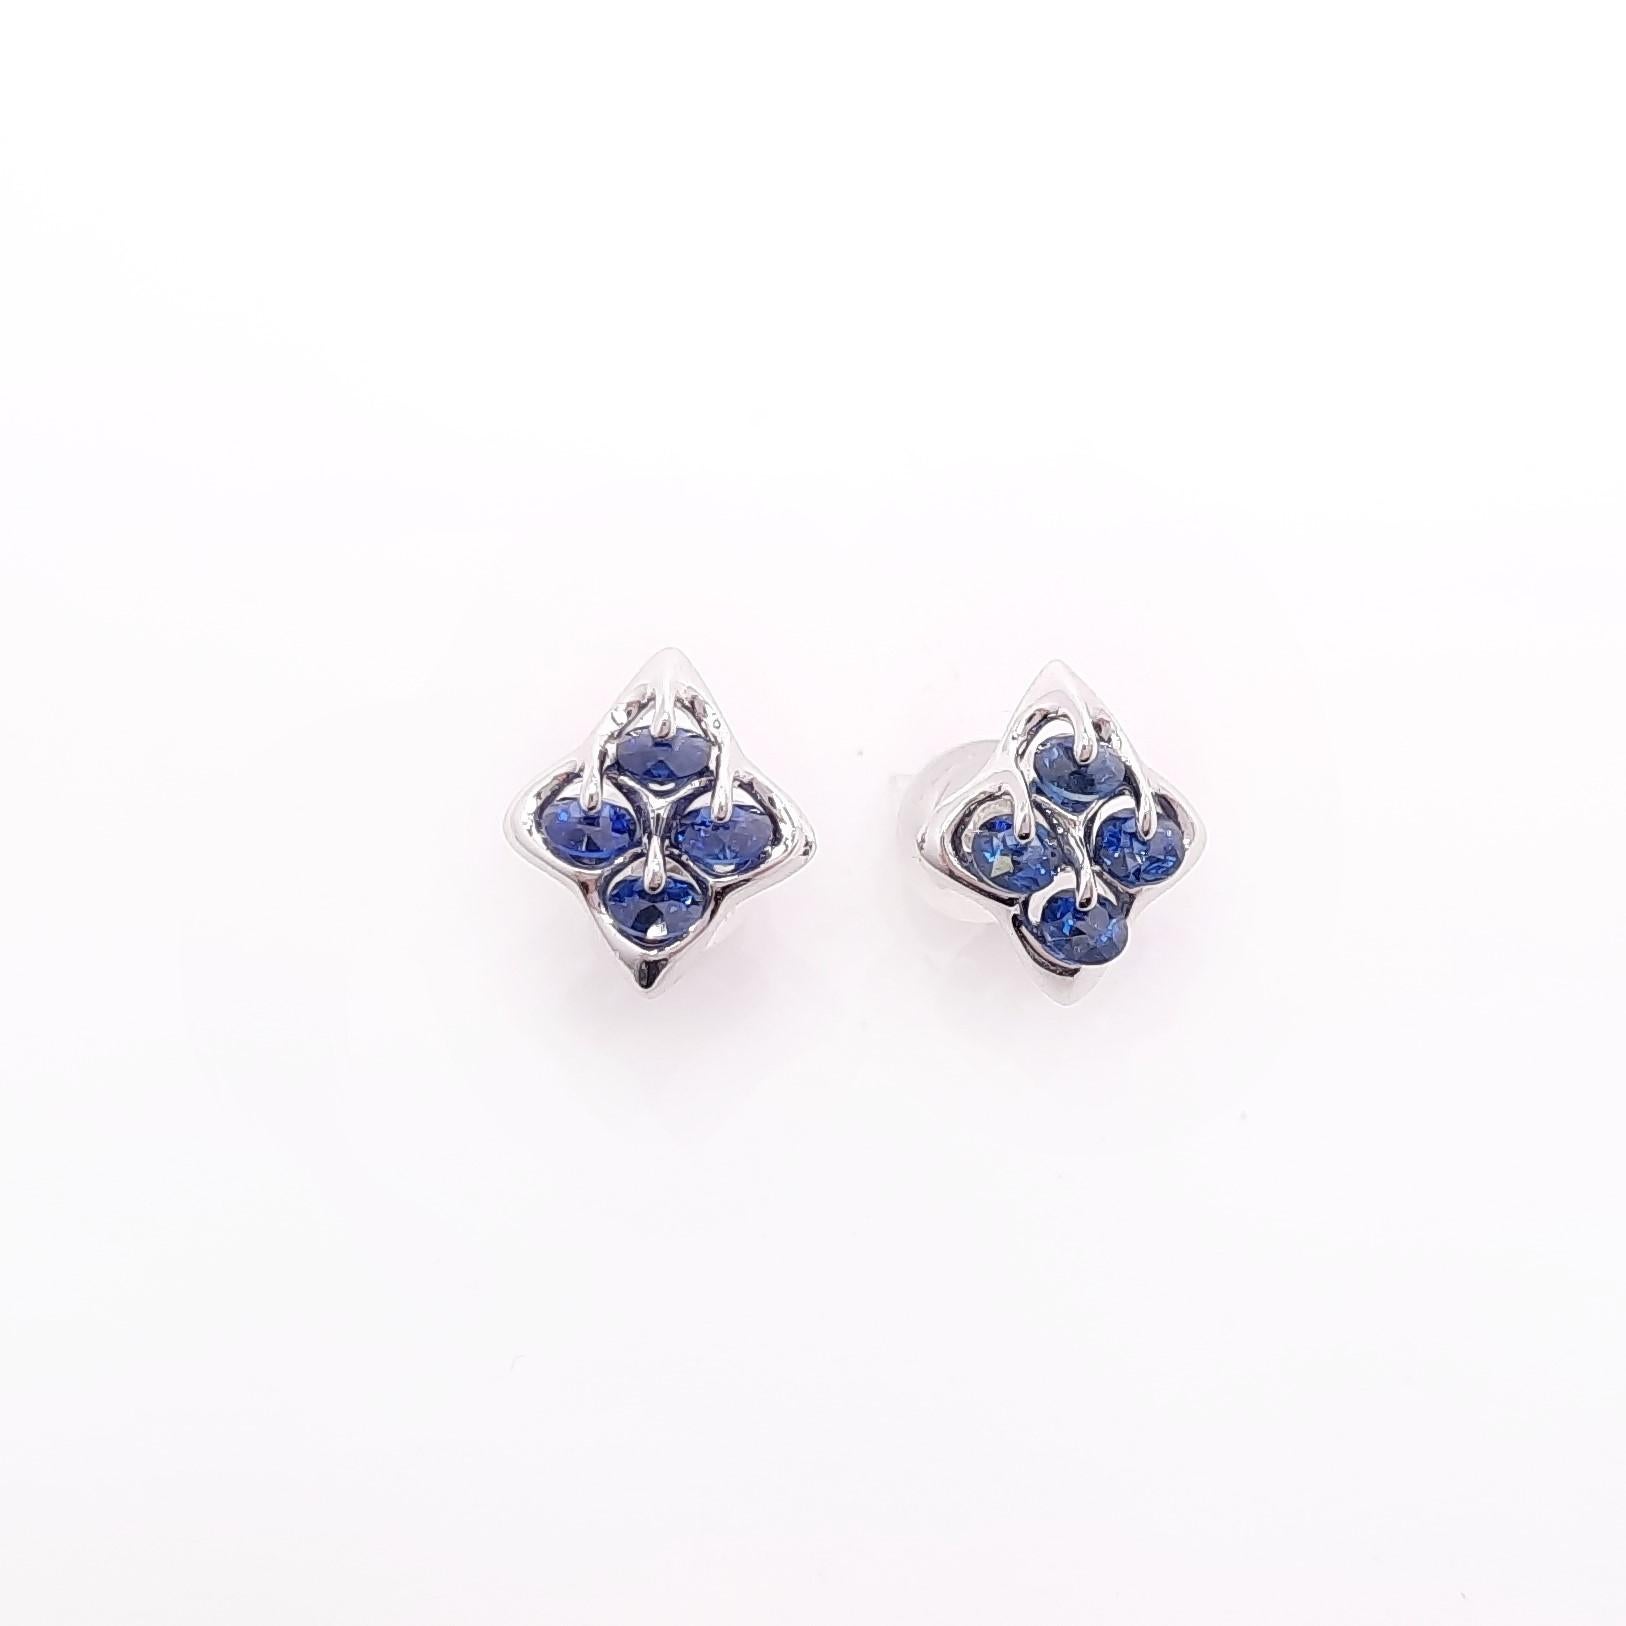 Inspired by the famous Russian Ballet, the Prima Star sapphire stud earrings created by MOISEIKIN® charm your day with the exceptional hue and uniqueness. The design is created with patented Russian setting technology, in which a gemstone trembles